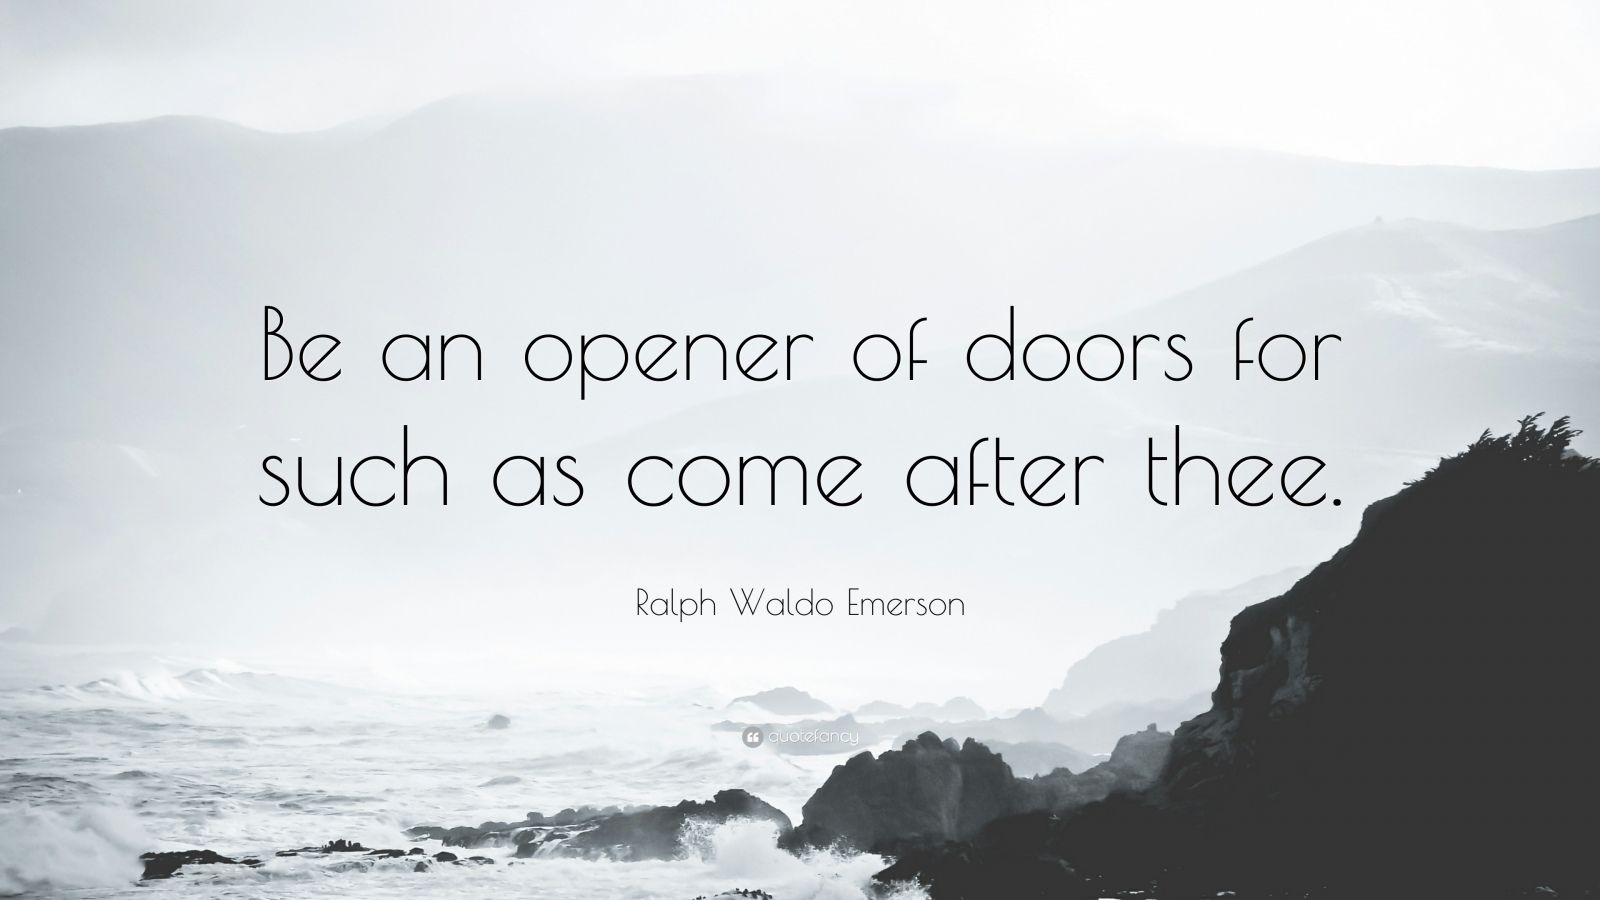 https://quotefancy.com/media/wallpaper/1600x900/485182-Ralph-Waldo-Emerson-Quote-Be-an-opener-of-doors-for-such-as-come.jpg